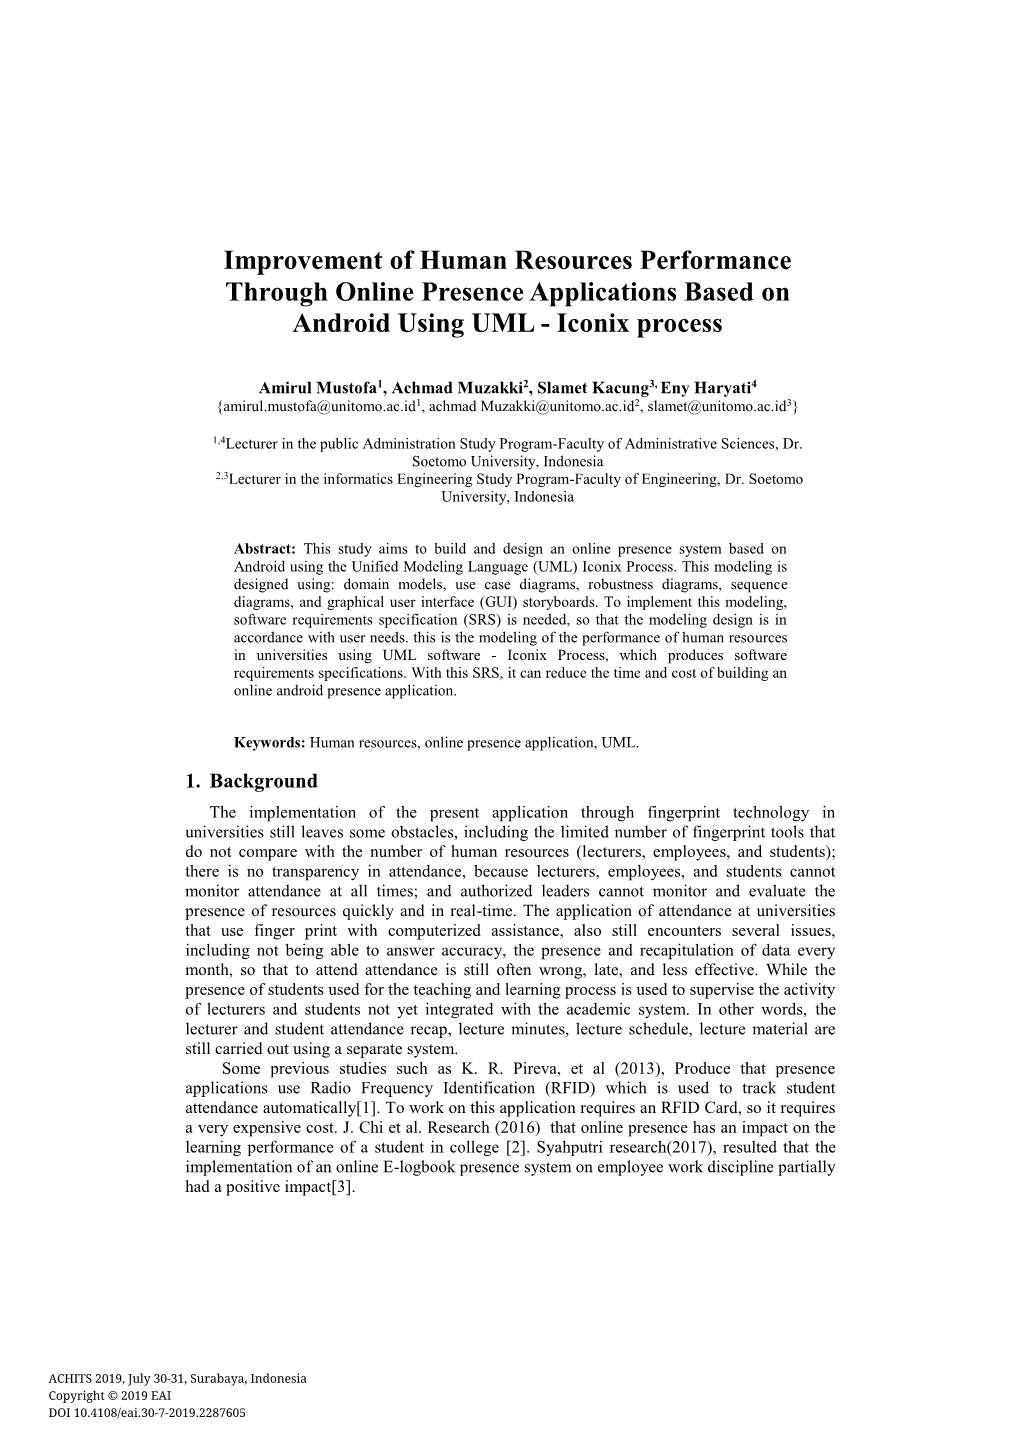 Improvement of Human Resources Performance Through Online Presence Applications Based on Android Using UML - Iconix Process